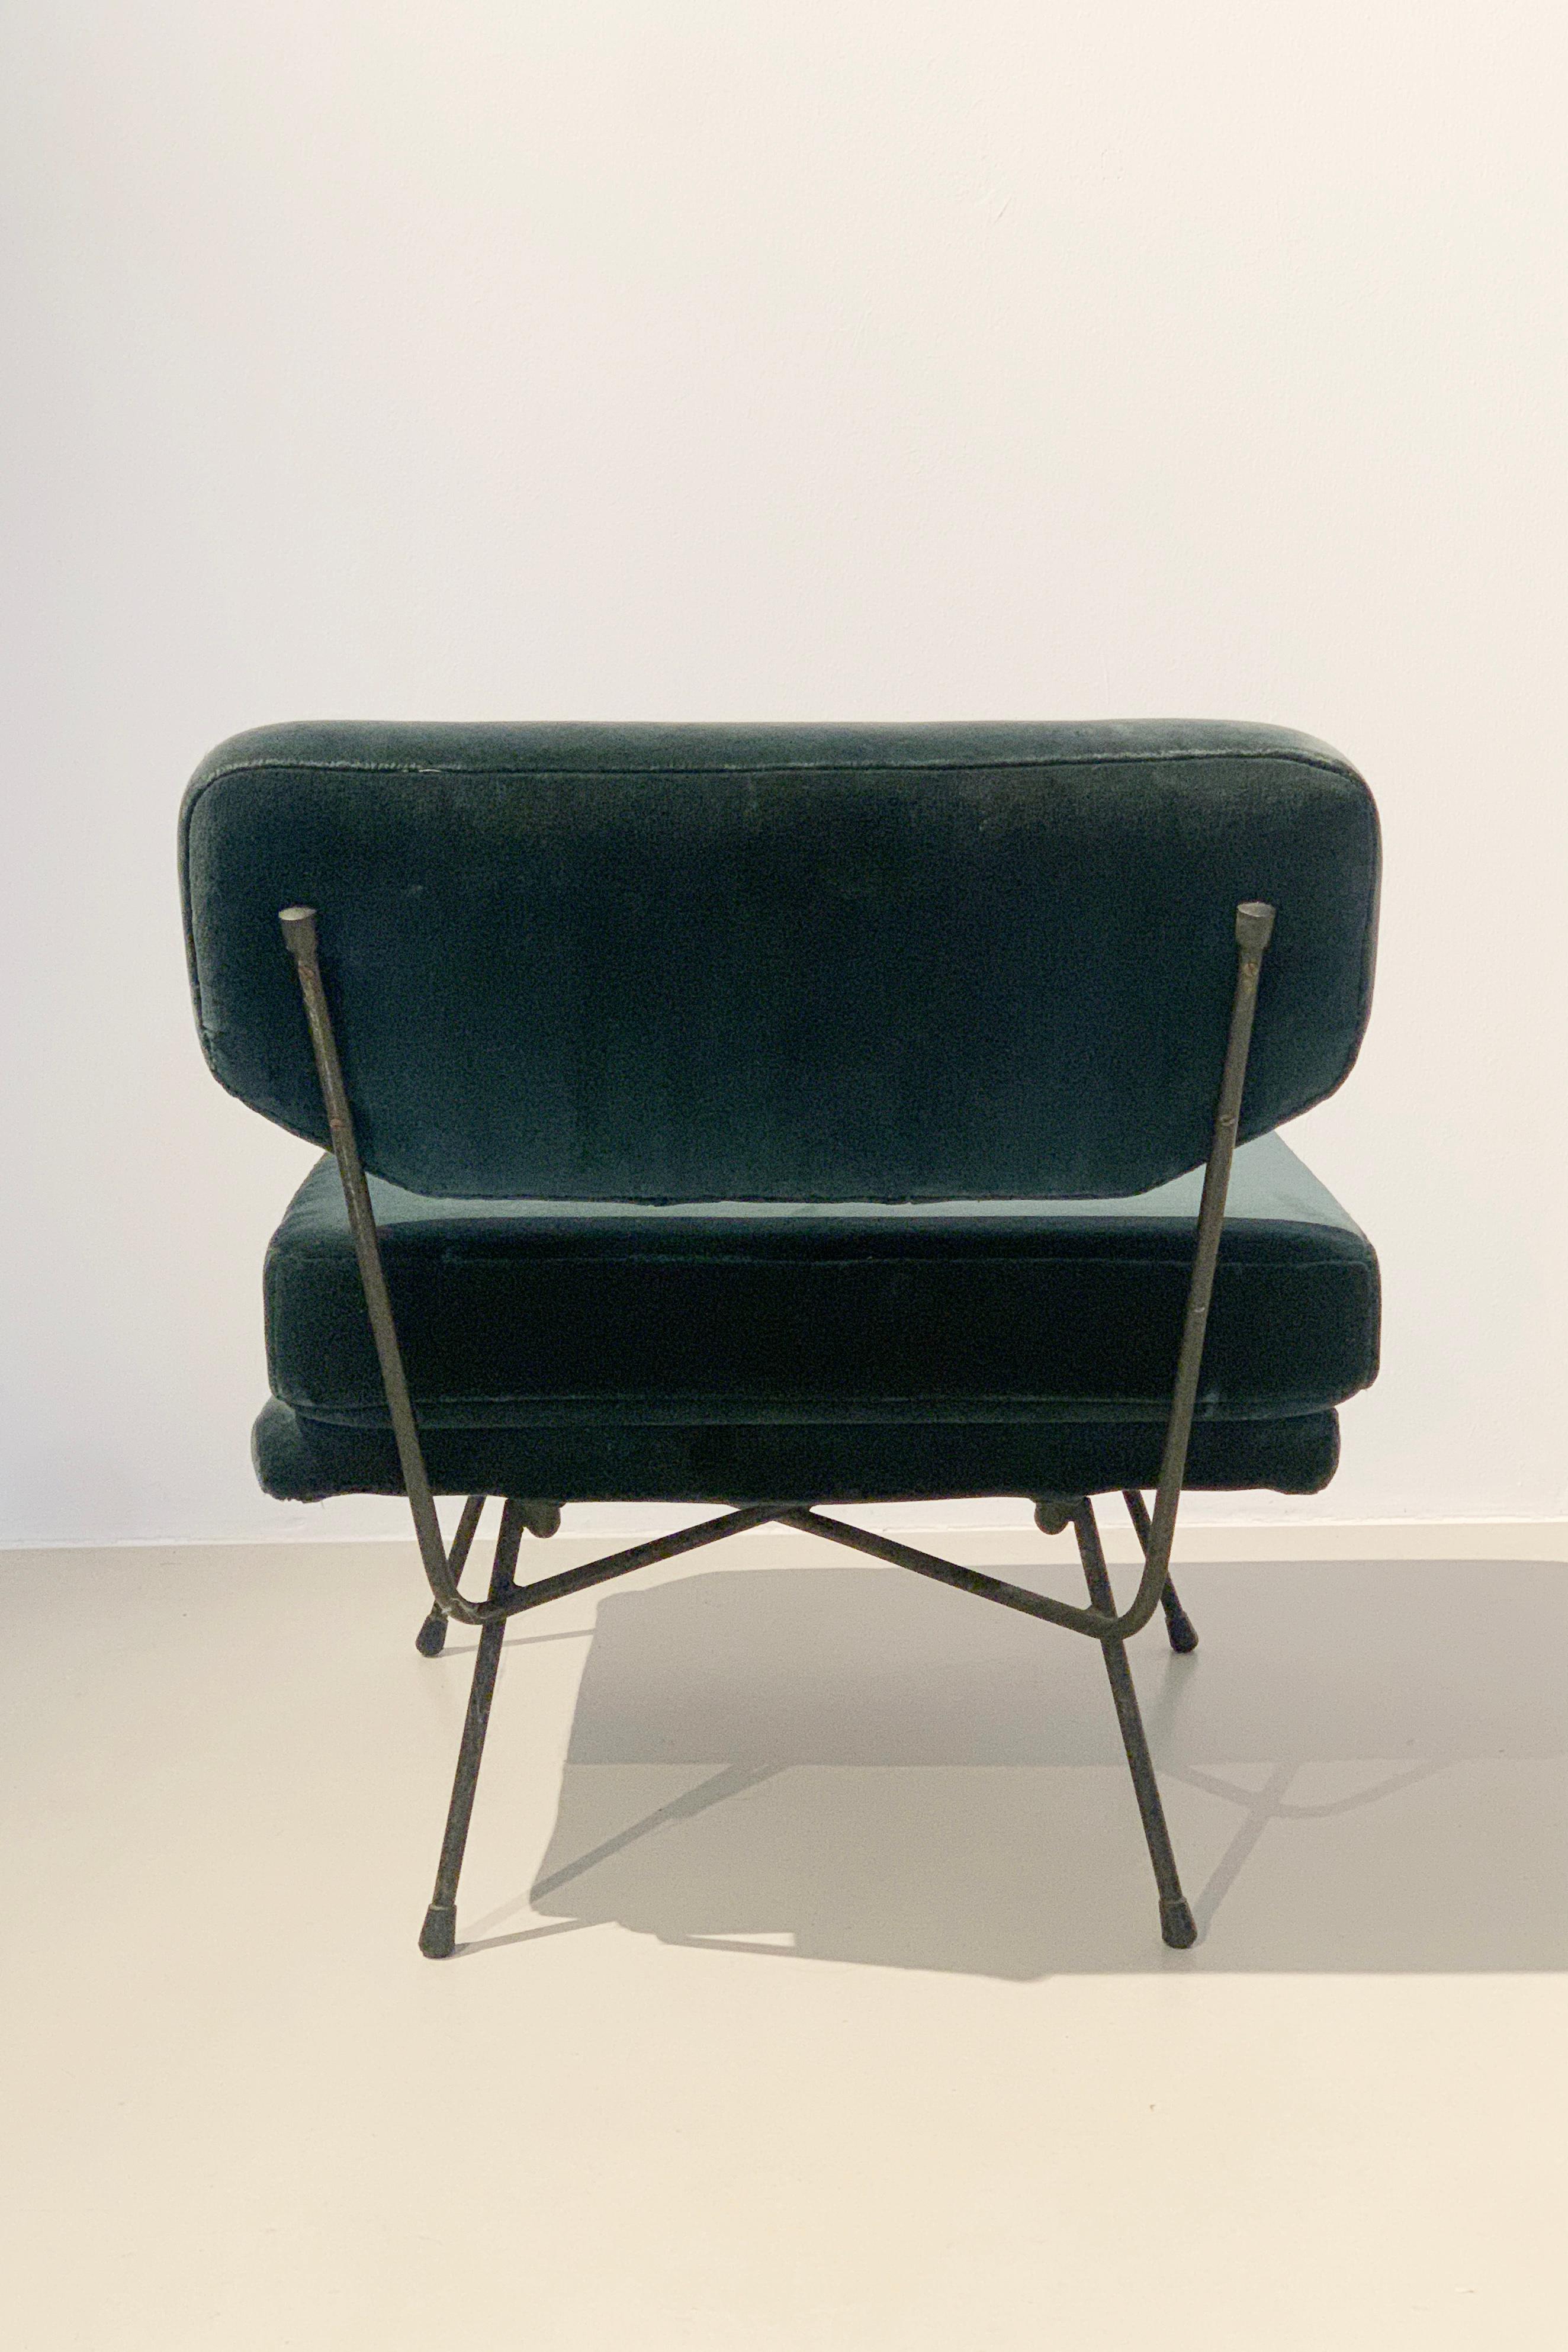 Mid-Century Modern Pair 'Elettra' Lounge Chairs by BBPR, Arflex, Italy 1953, Compasso D'Oro 1954 For Sale